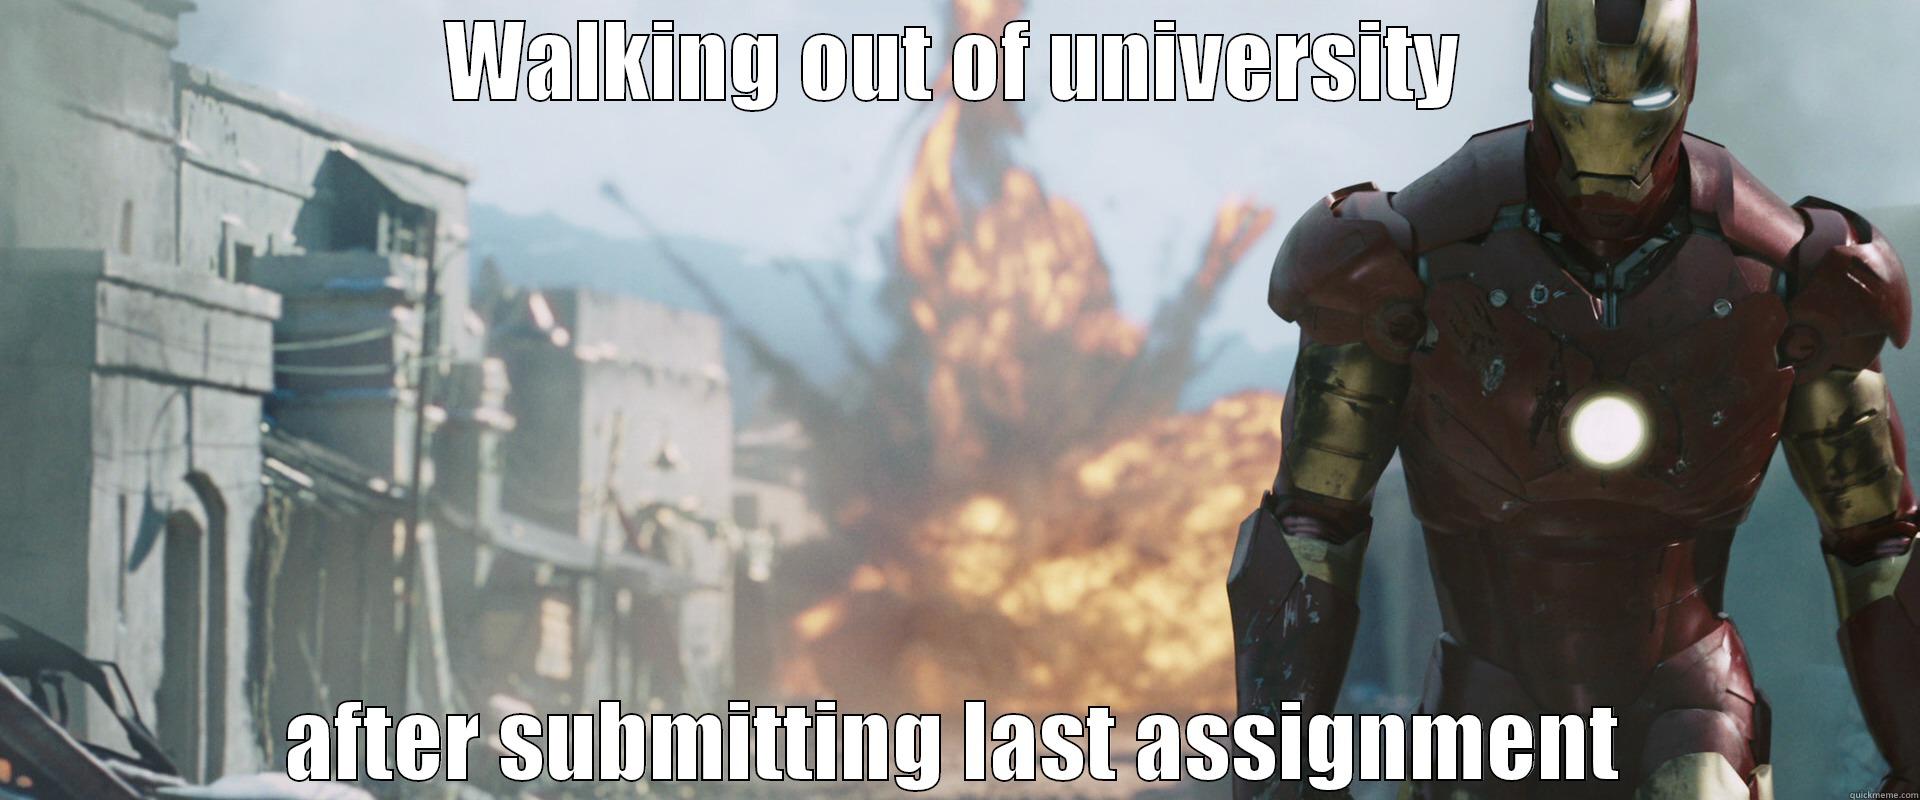 WALKING OUT OF UNIVERSITY AFTER SUBMITTING LAST ASSIGNMENT Misc